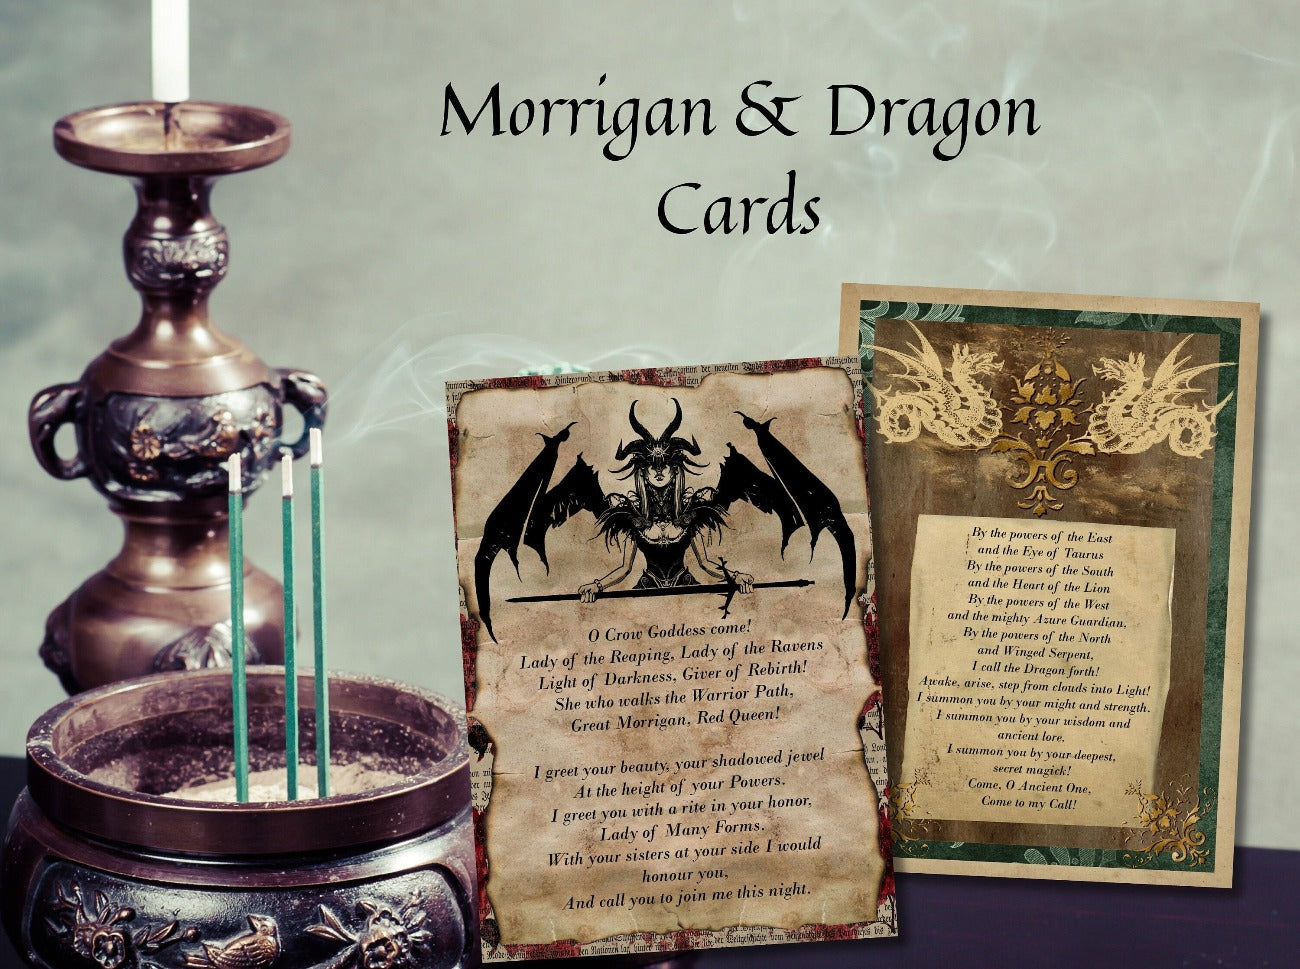 ALTAR PRAYER CARDS – Morrigan and Dragon cards set on a Wiccan Altar - Morgana Magick Spell